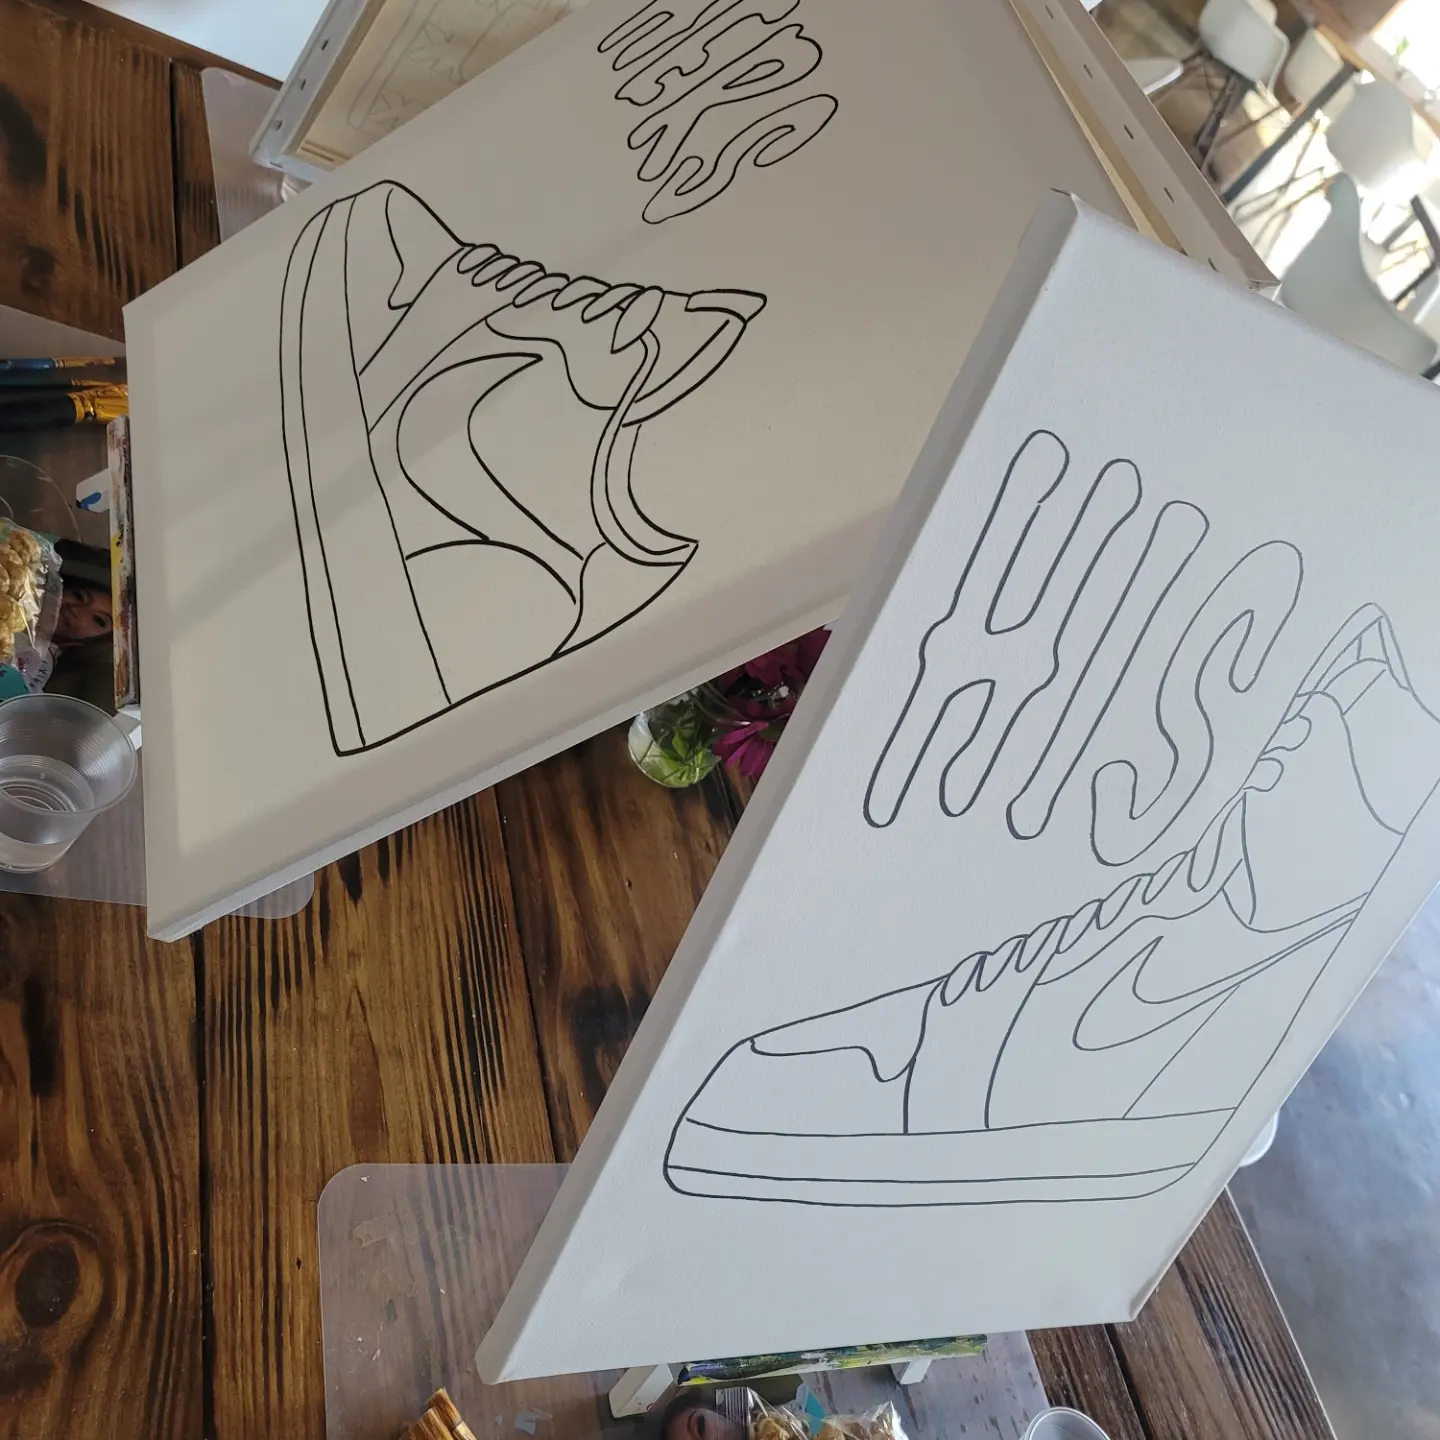 A pair of shoes are drawn on paper.